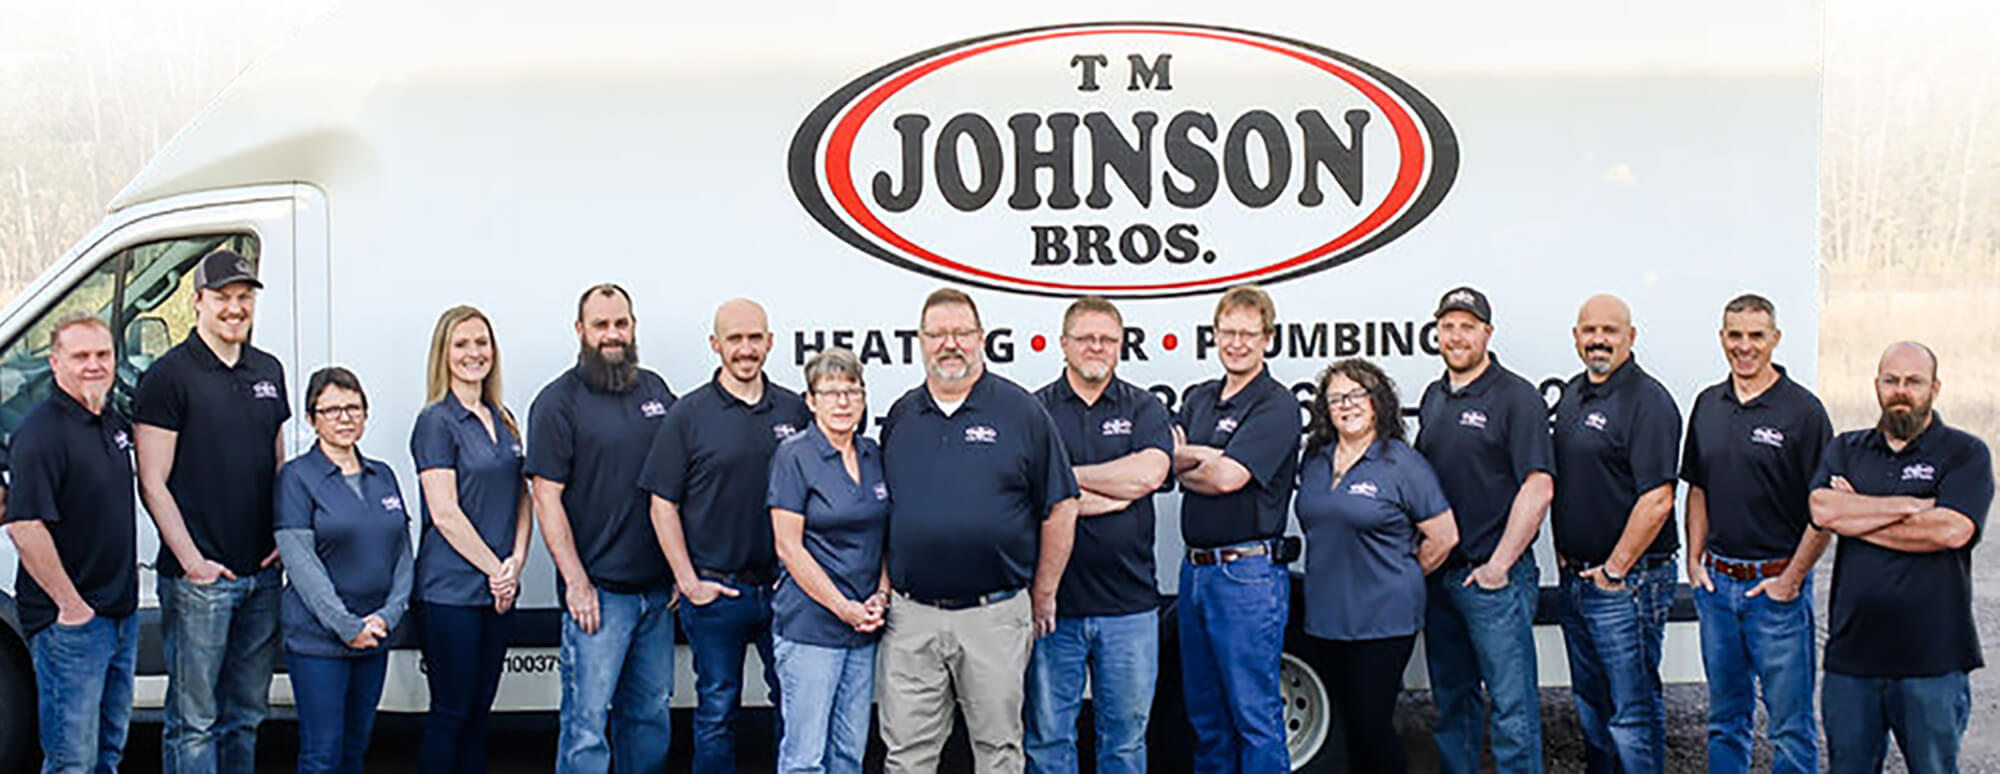 Read what customers have to say about our  Furnace repair service in Cambridge MN.